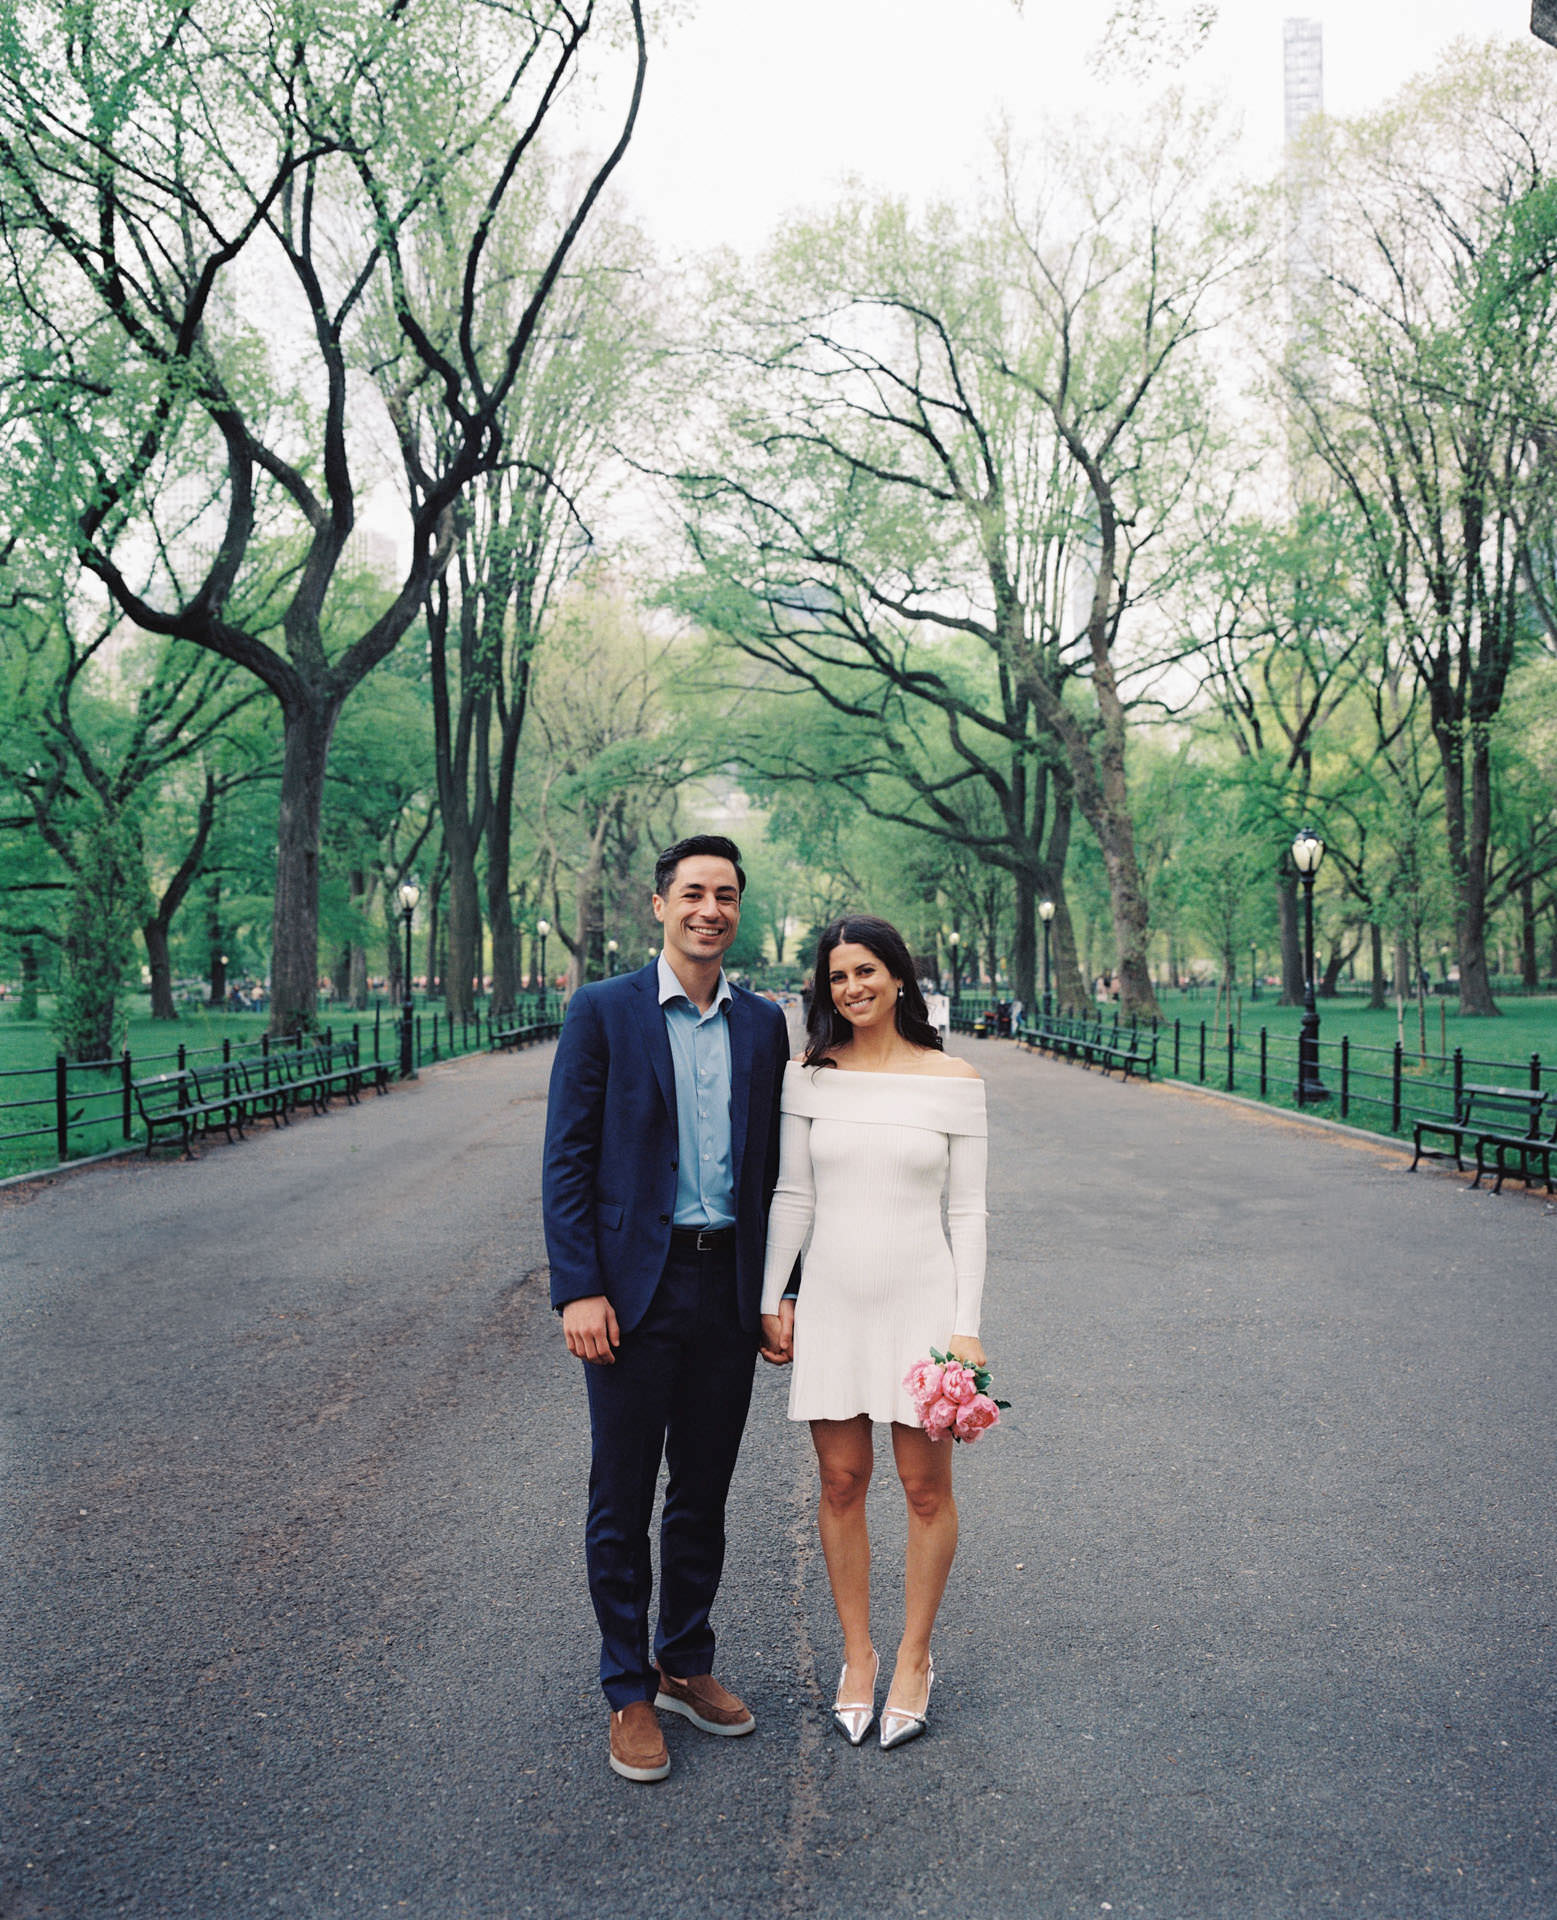 A couple walking down the tree-lined promenade of The Mall, surrounded by the lush canopy of American elm trees.